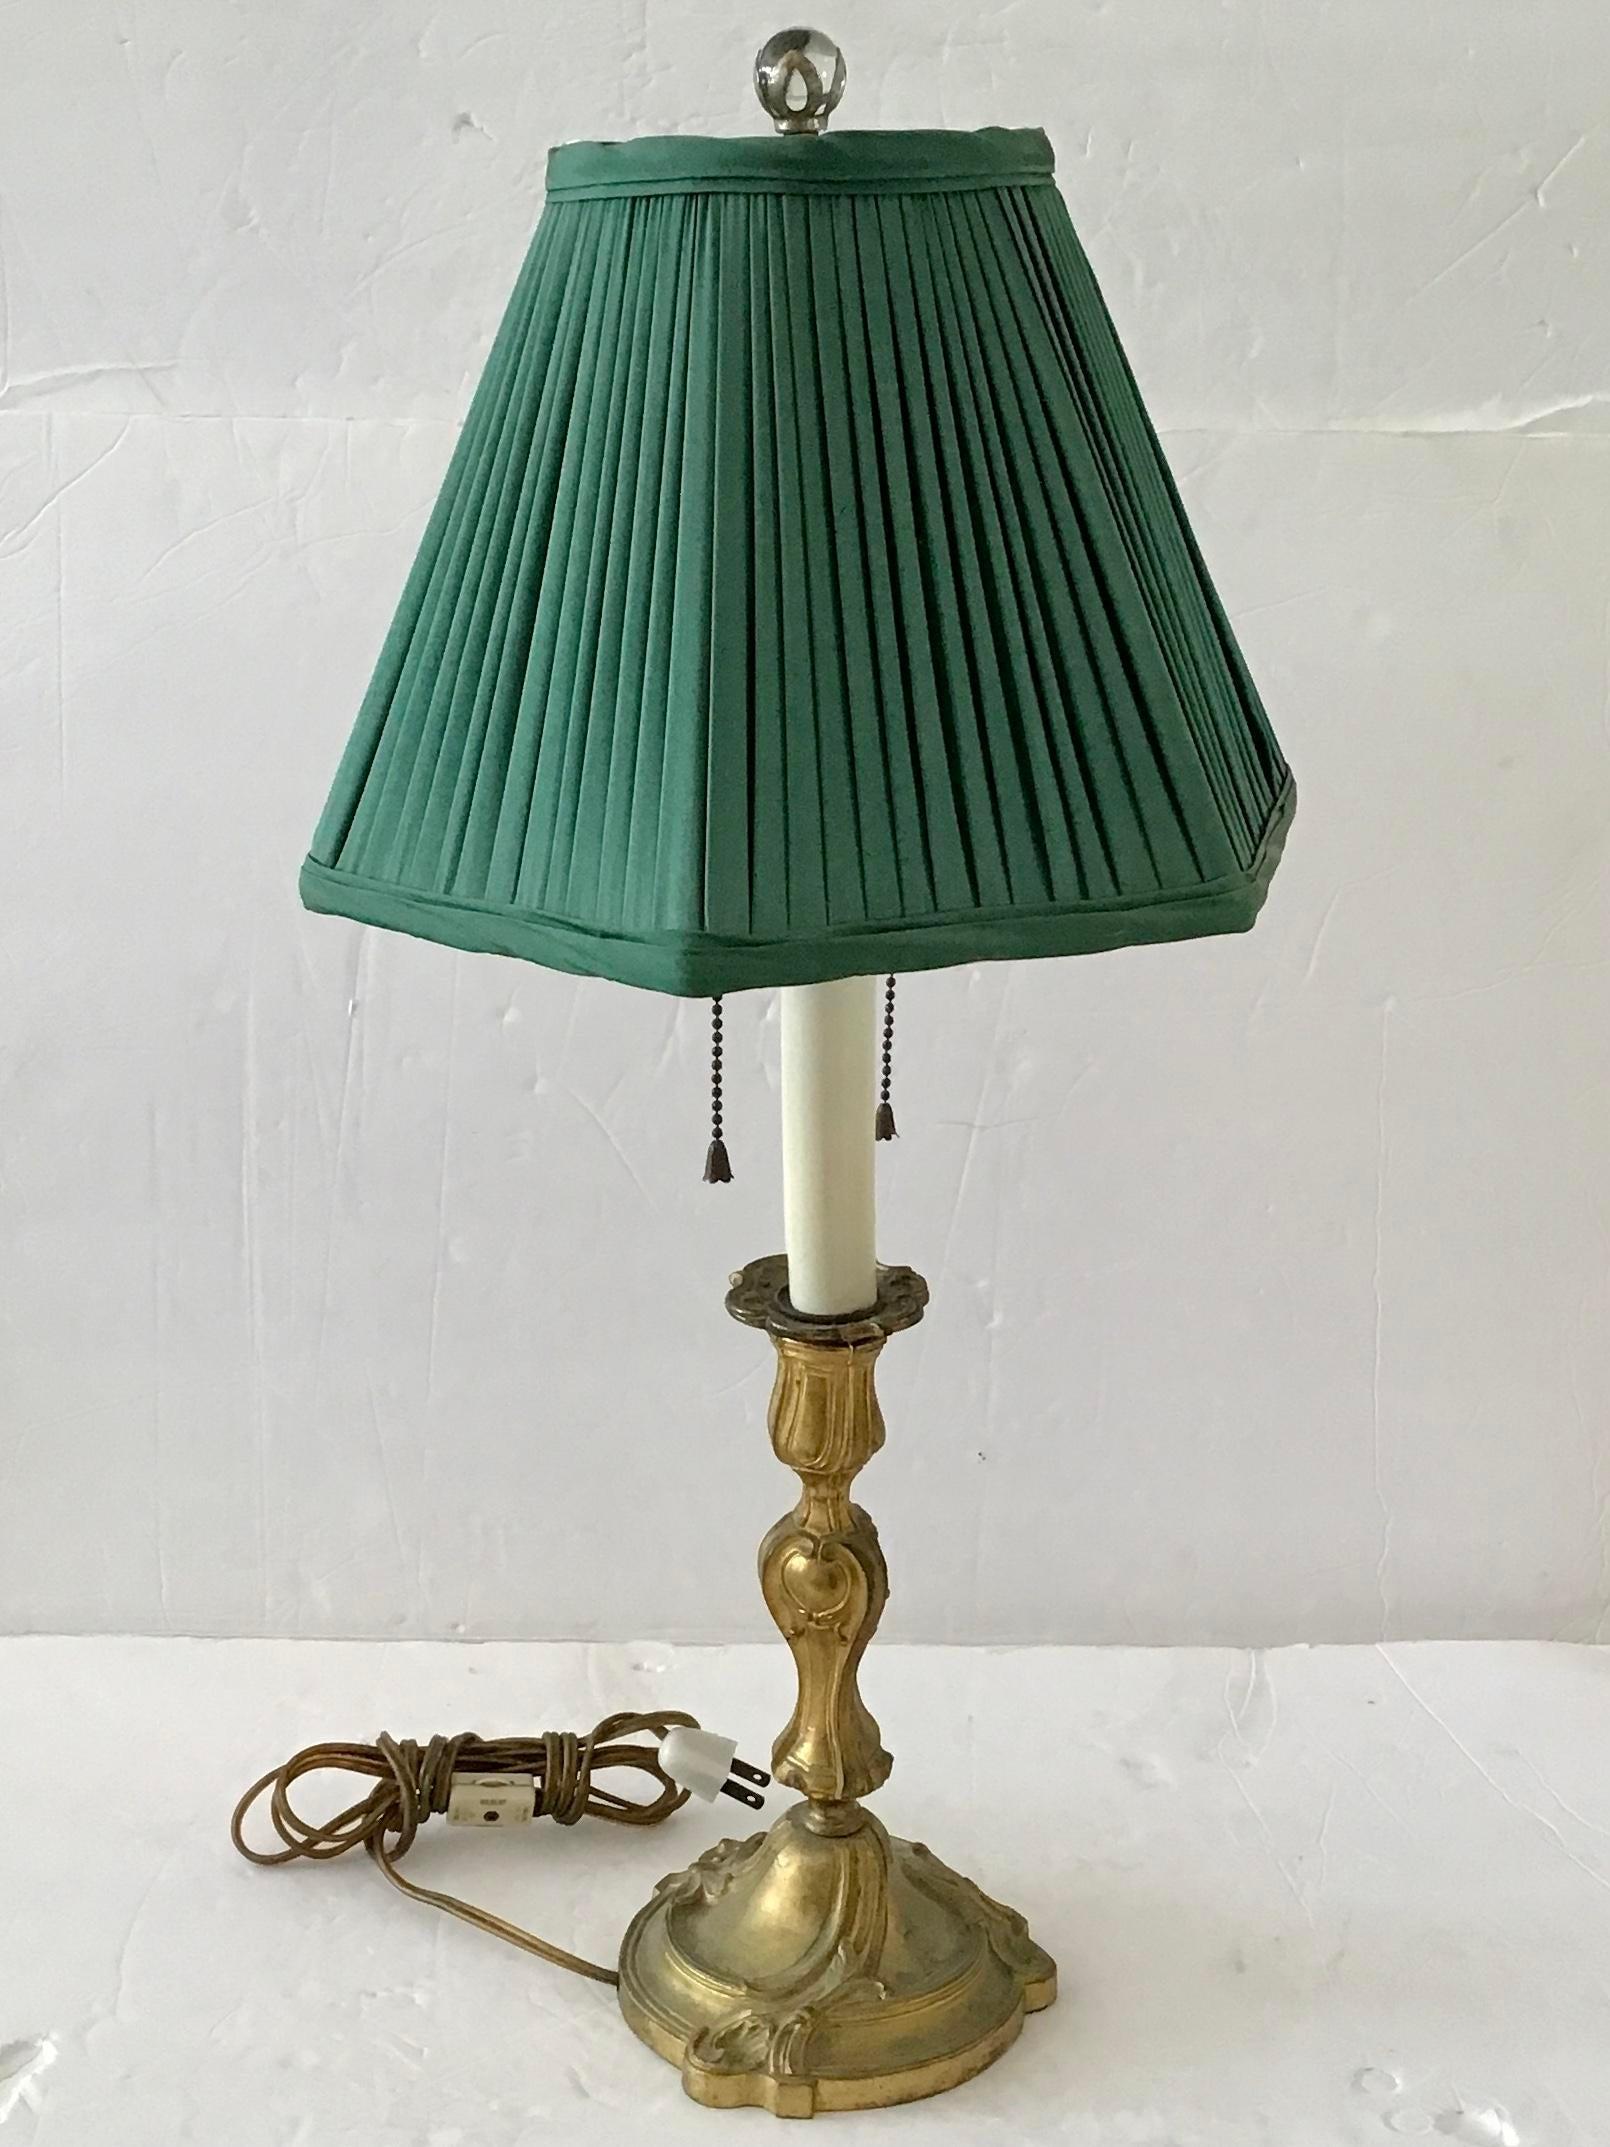 Mid-20th Century French Git Bronze Table Lamp With Green Shade For Sale